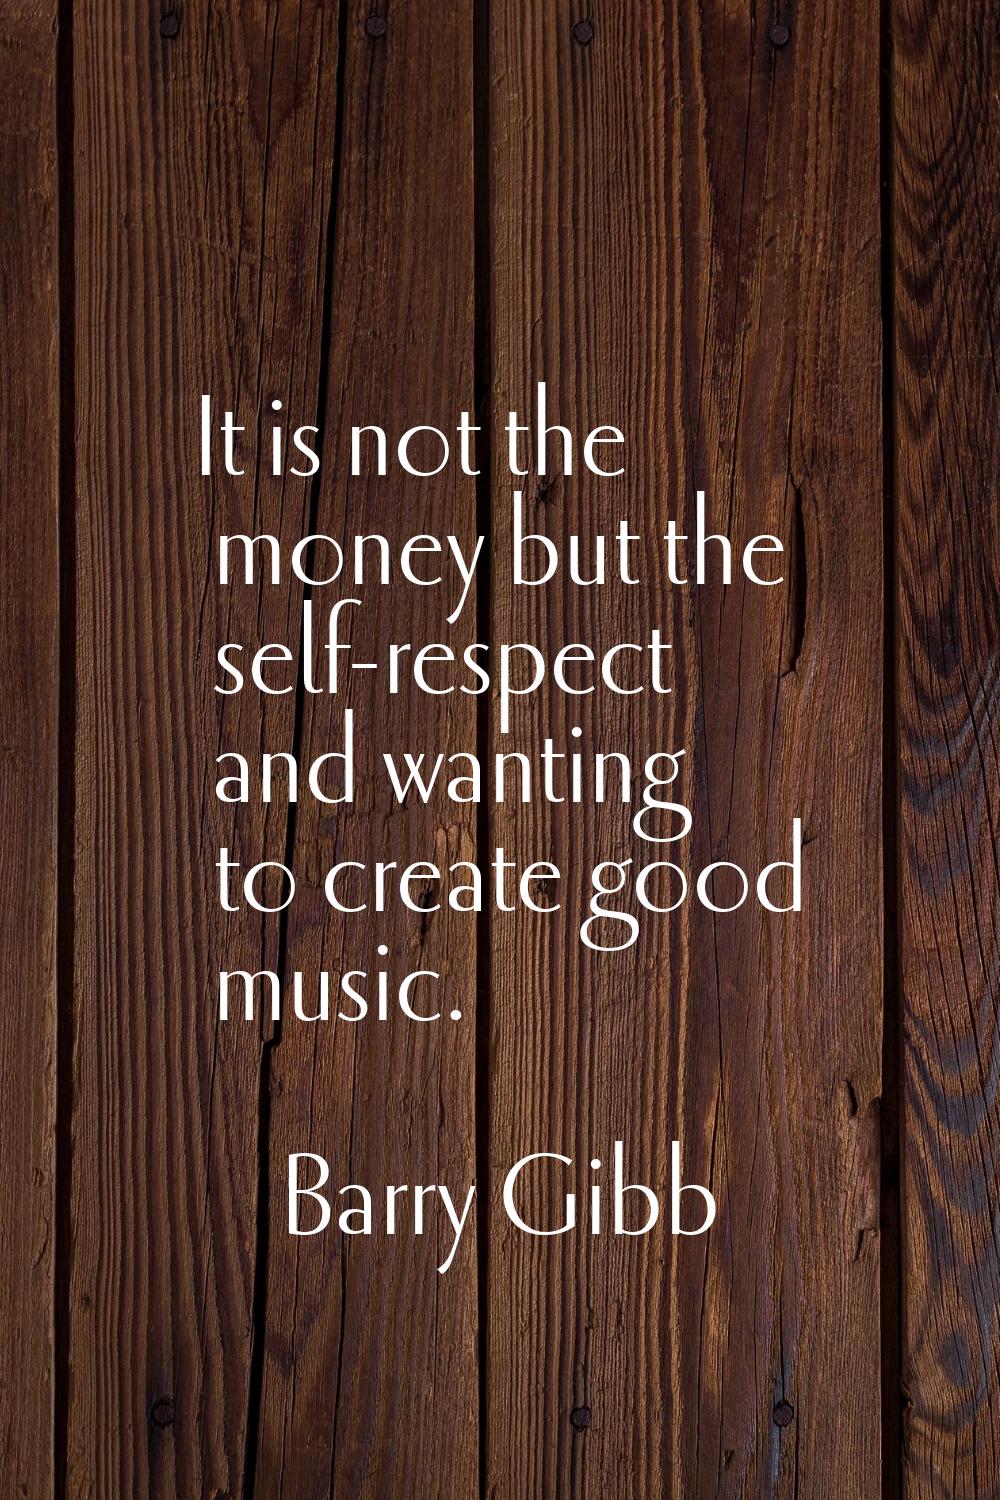 It is not the money but the self-respect and wanting to create good music.